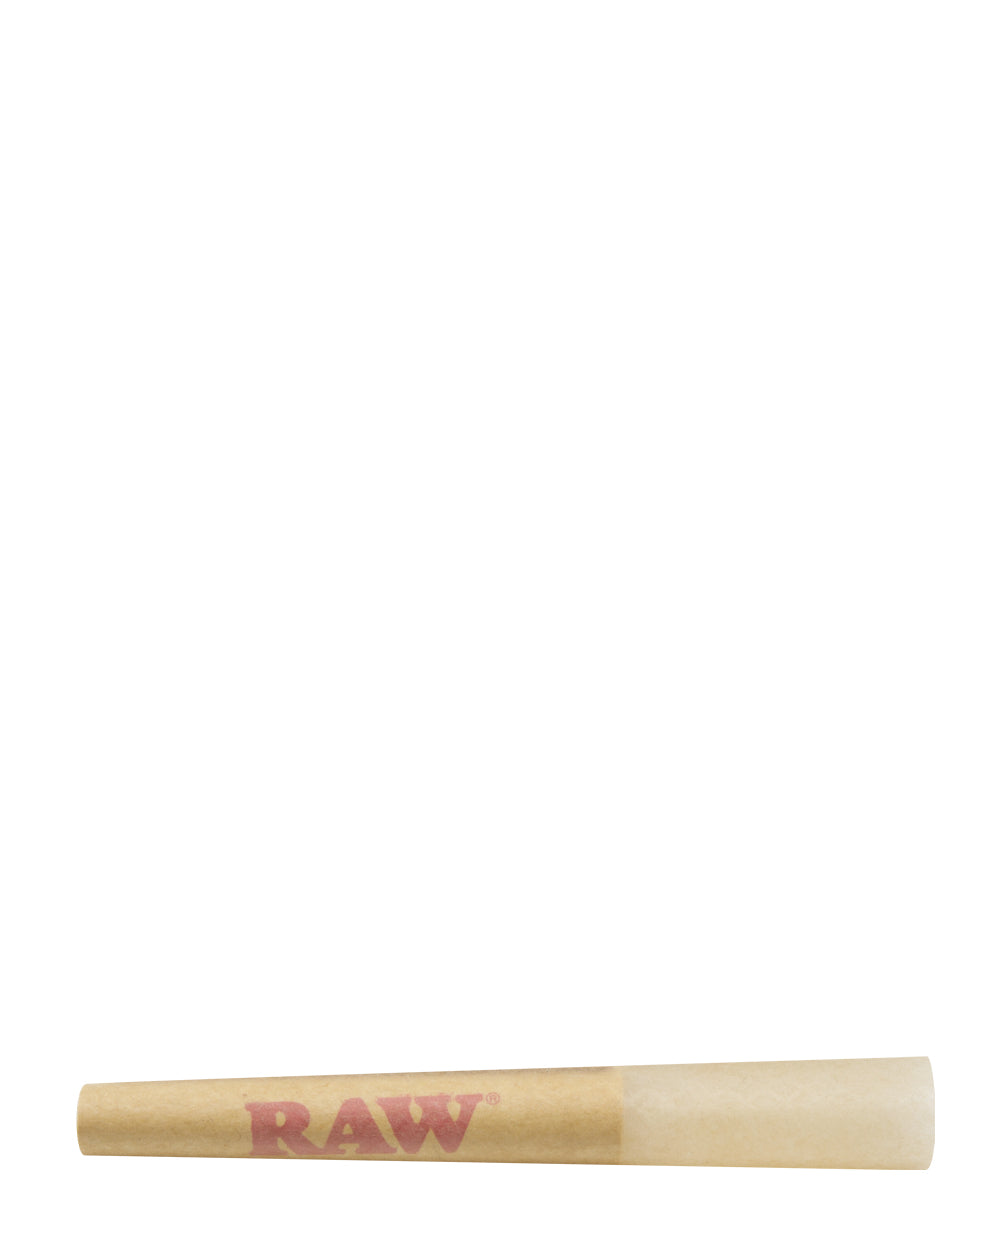 RAW | Classic Single Size Pre-Rolled Cones | 70mm - Unbleached Paper - 720 Count - 4